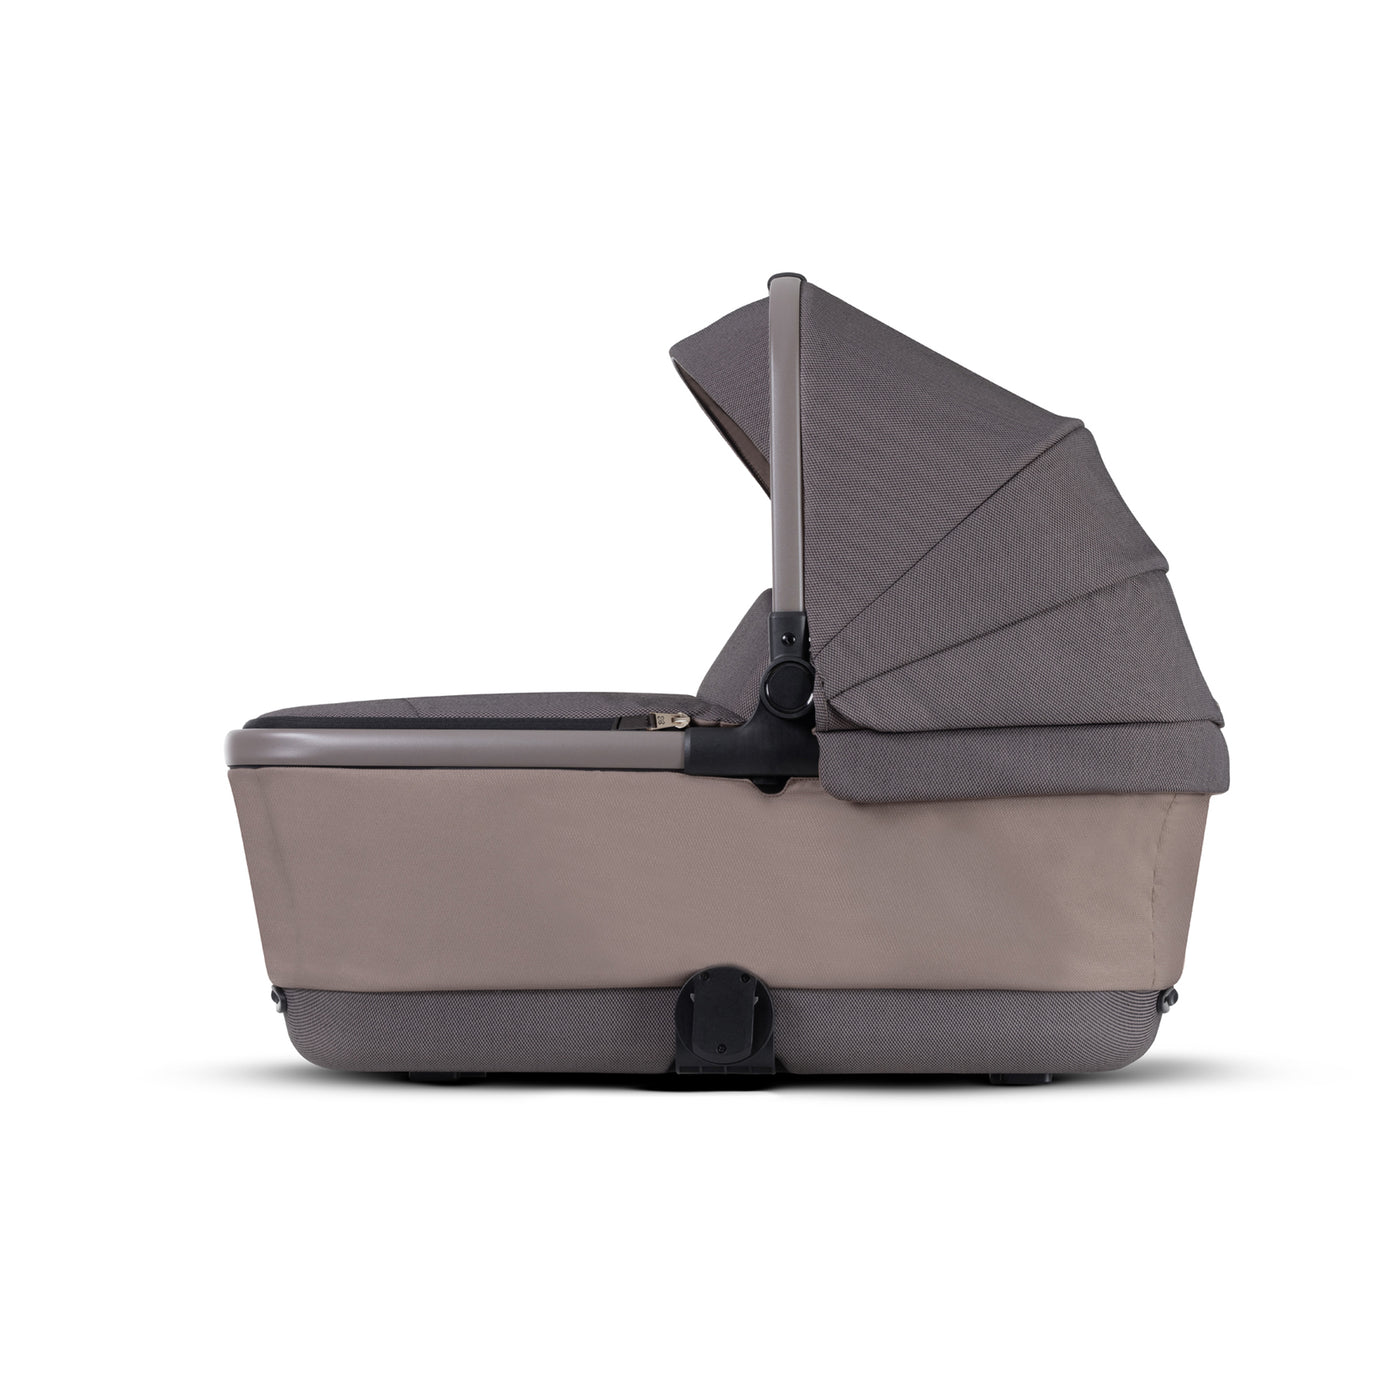 Silver Cross Reef First Bed Carrycot - Earth